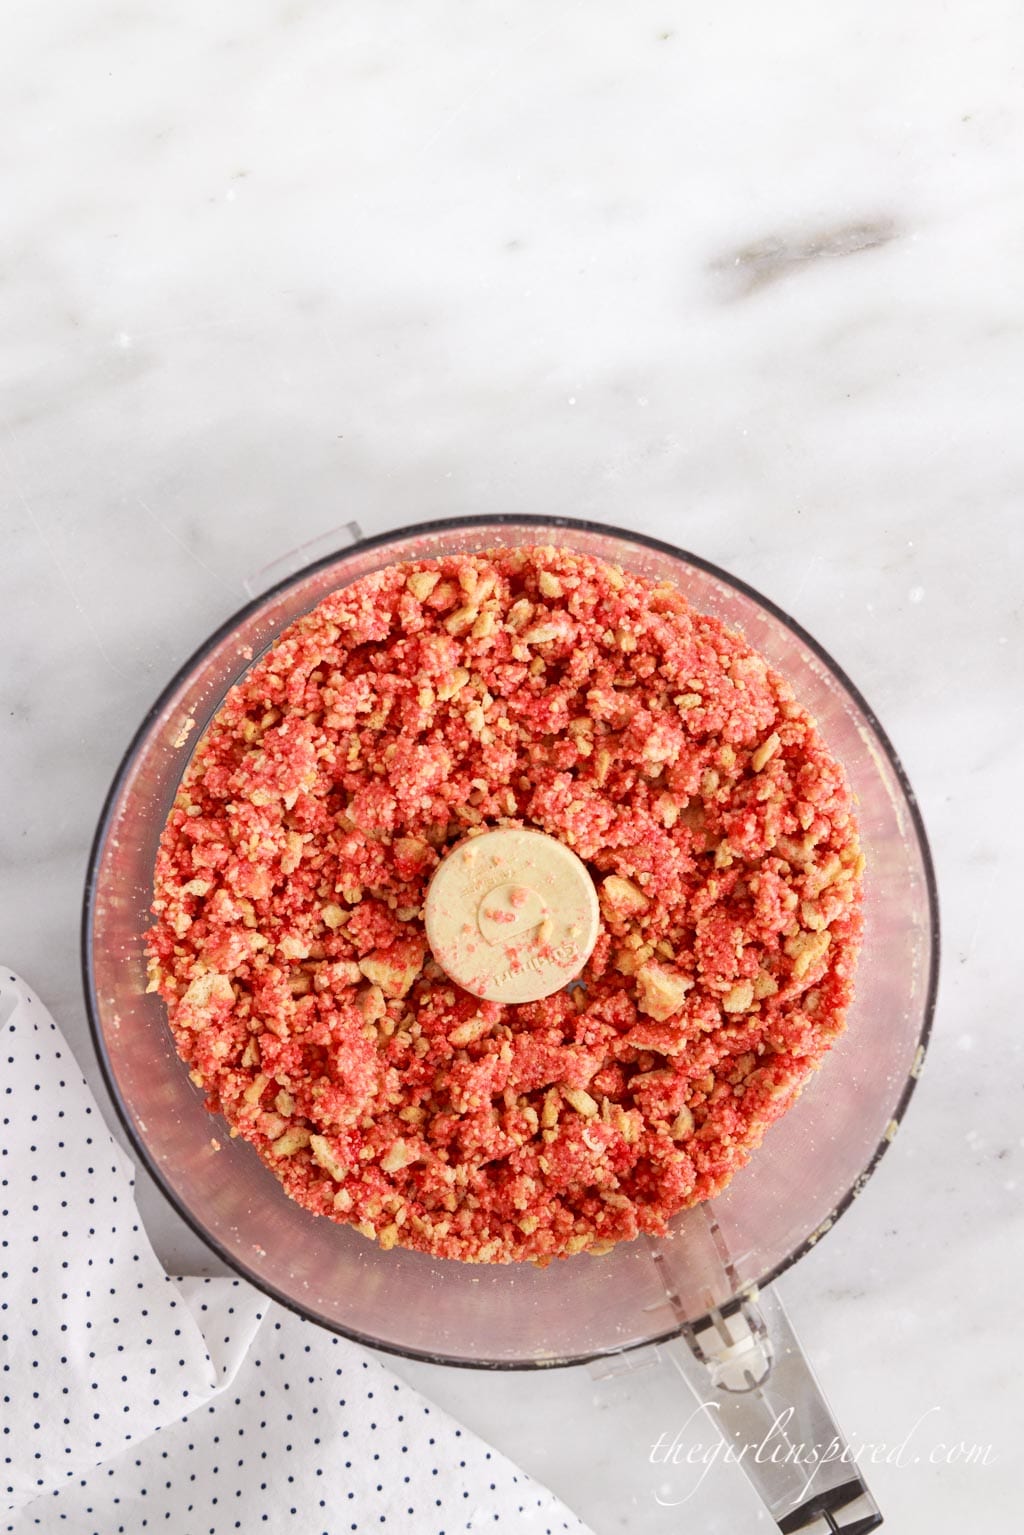 mixing strawberry crunch topping ingredients in food processor